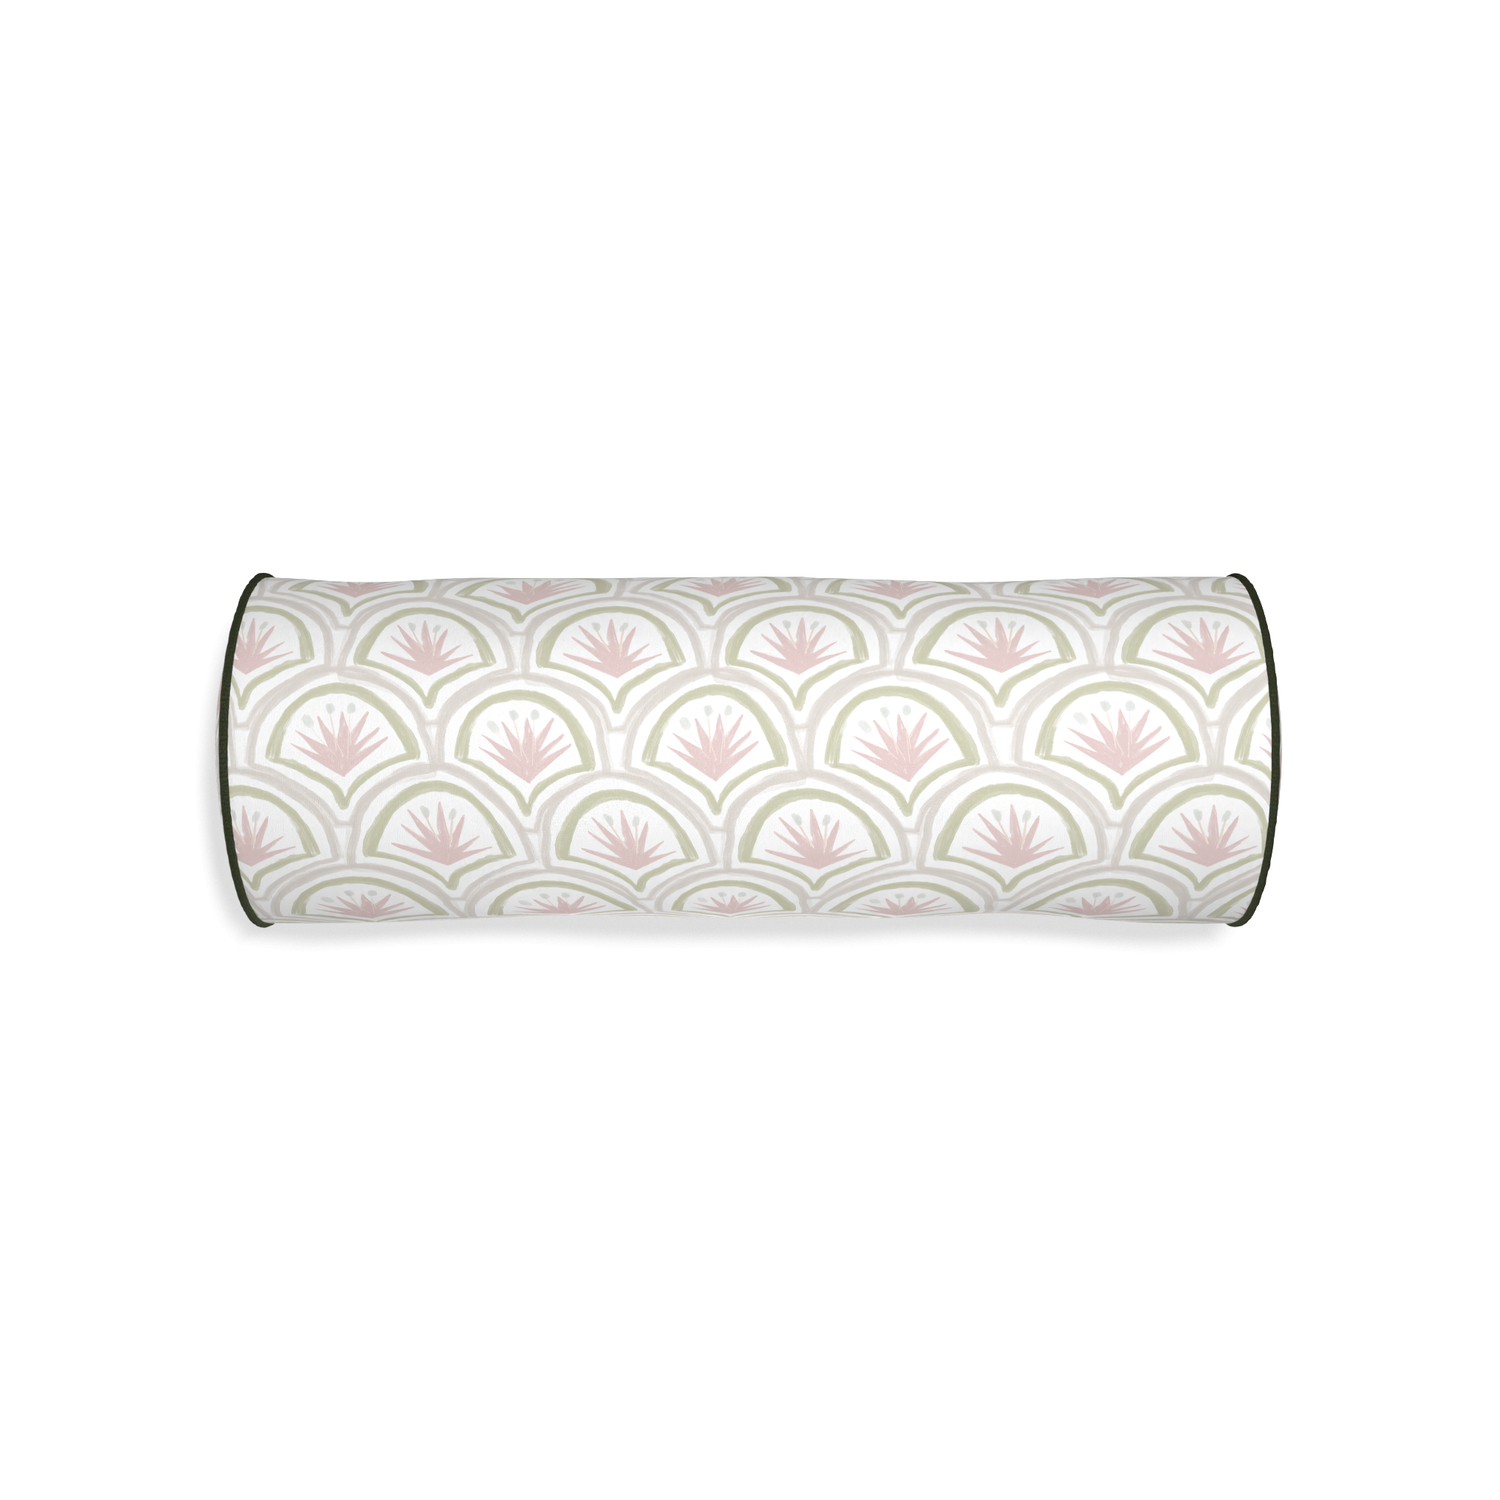 Bolster thatcher rose custom pink & green palmpillow with f piping on white background